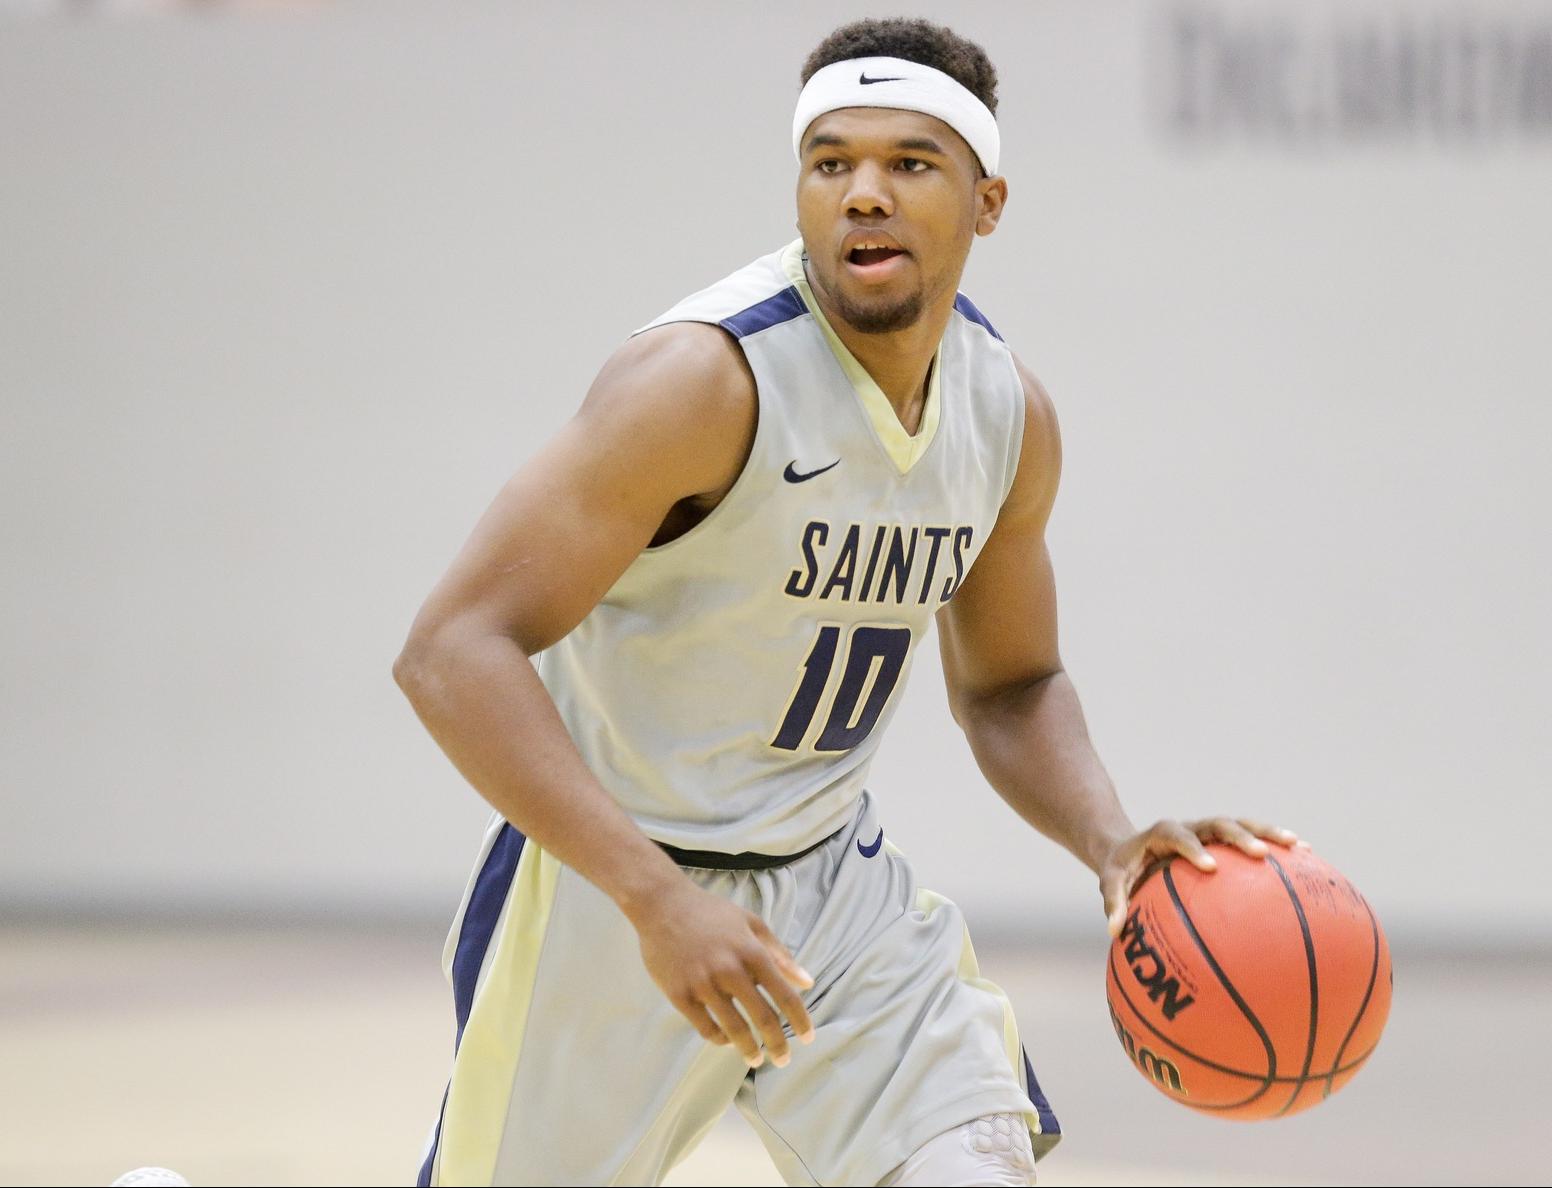 Saints knock Off Top 12 NAIA DI Opponent Oklahoma City University in Overtime